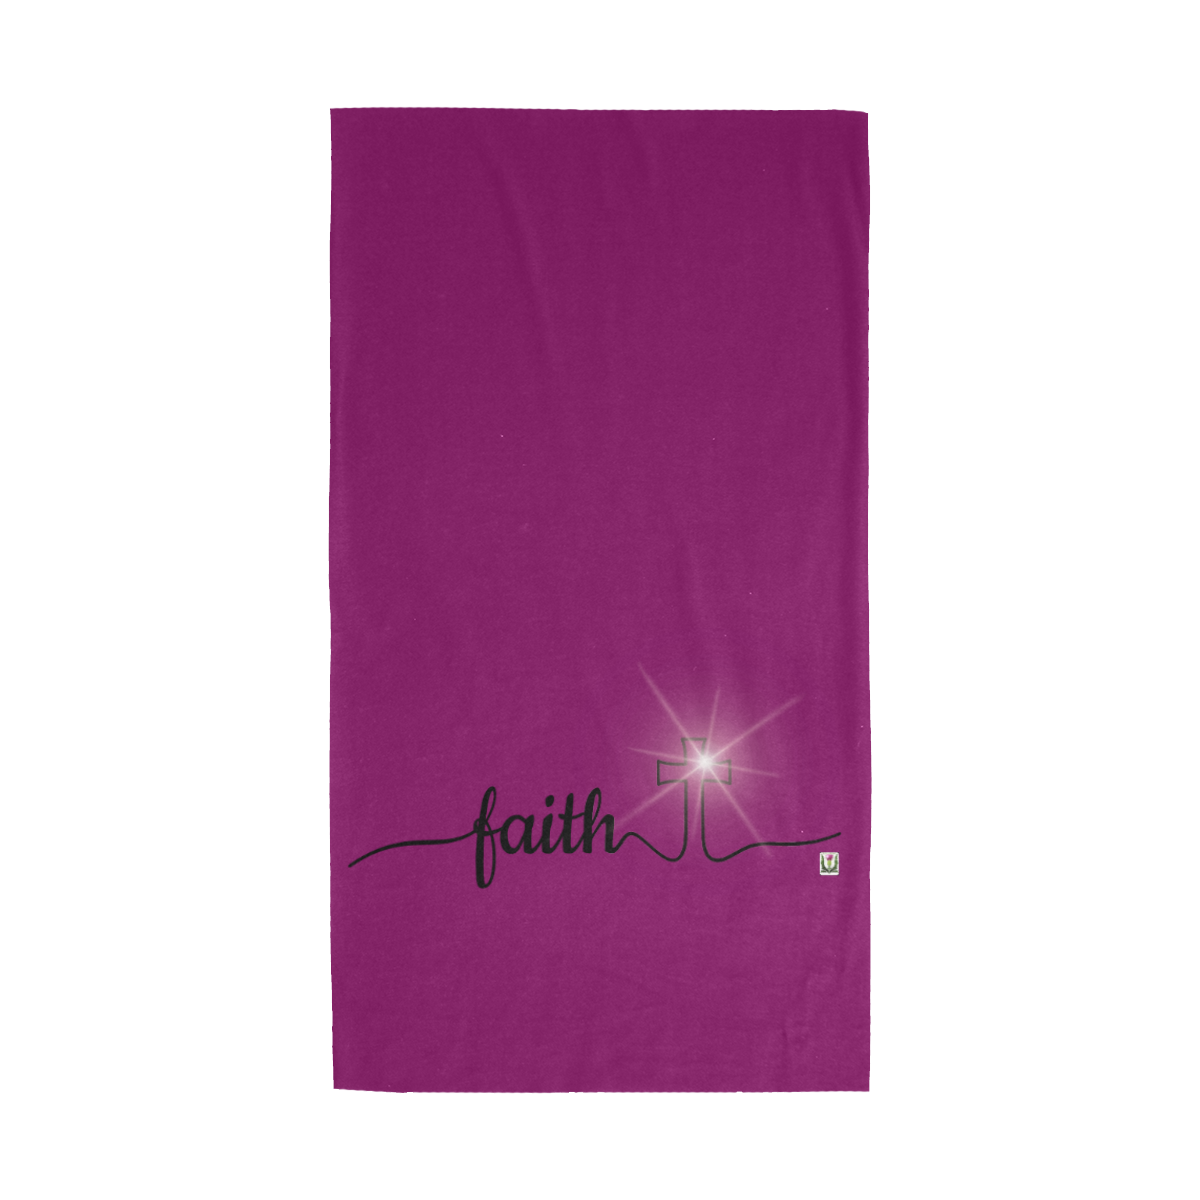 Fairlings Delight's The Word Collection- Faith 53086d9 Multifunctional Headwear